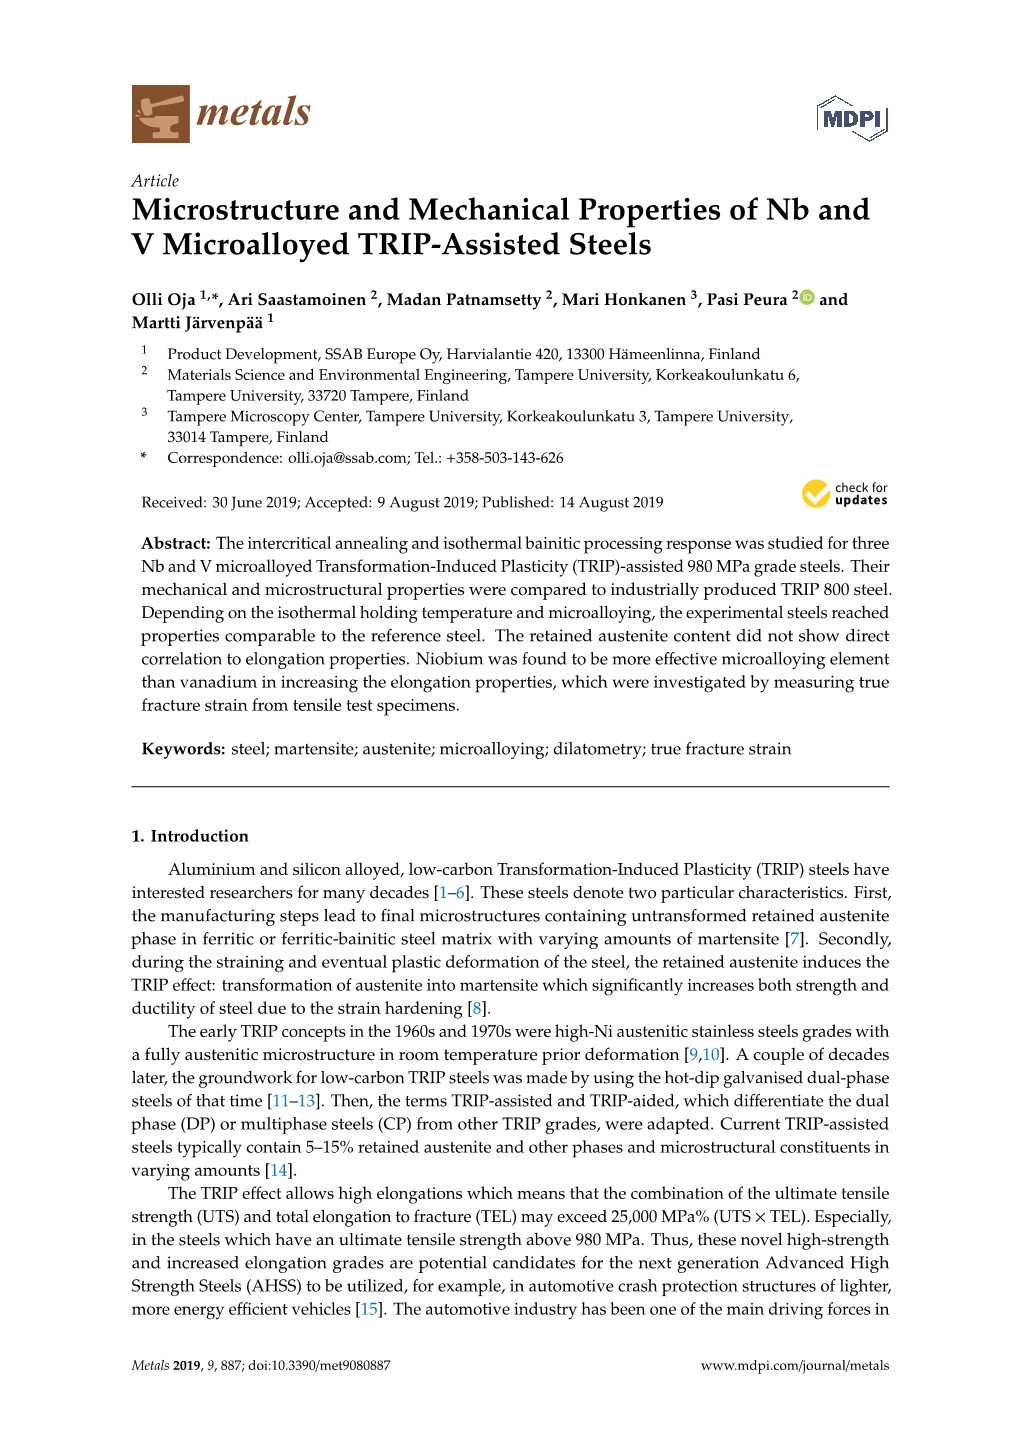 Microstructure and Mechanical Properties of Nb and V Microalloyed TRIP-Assisted Steels